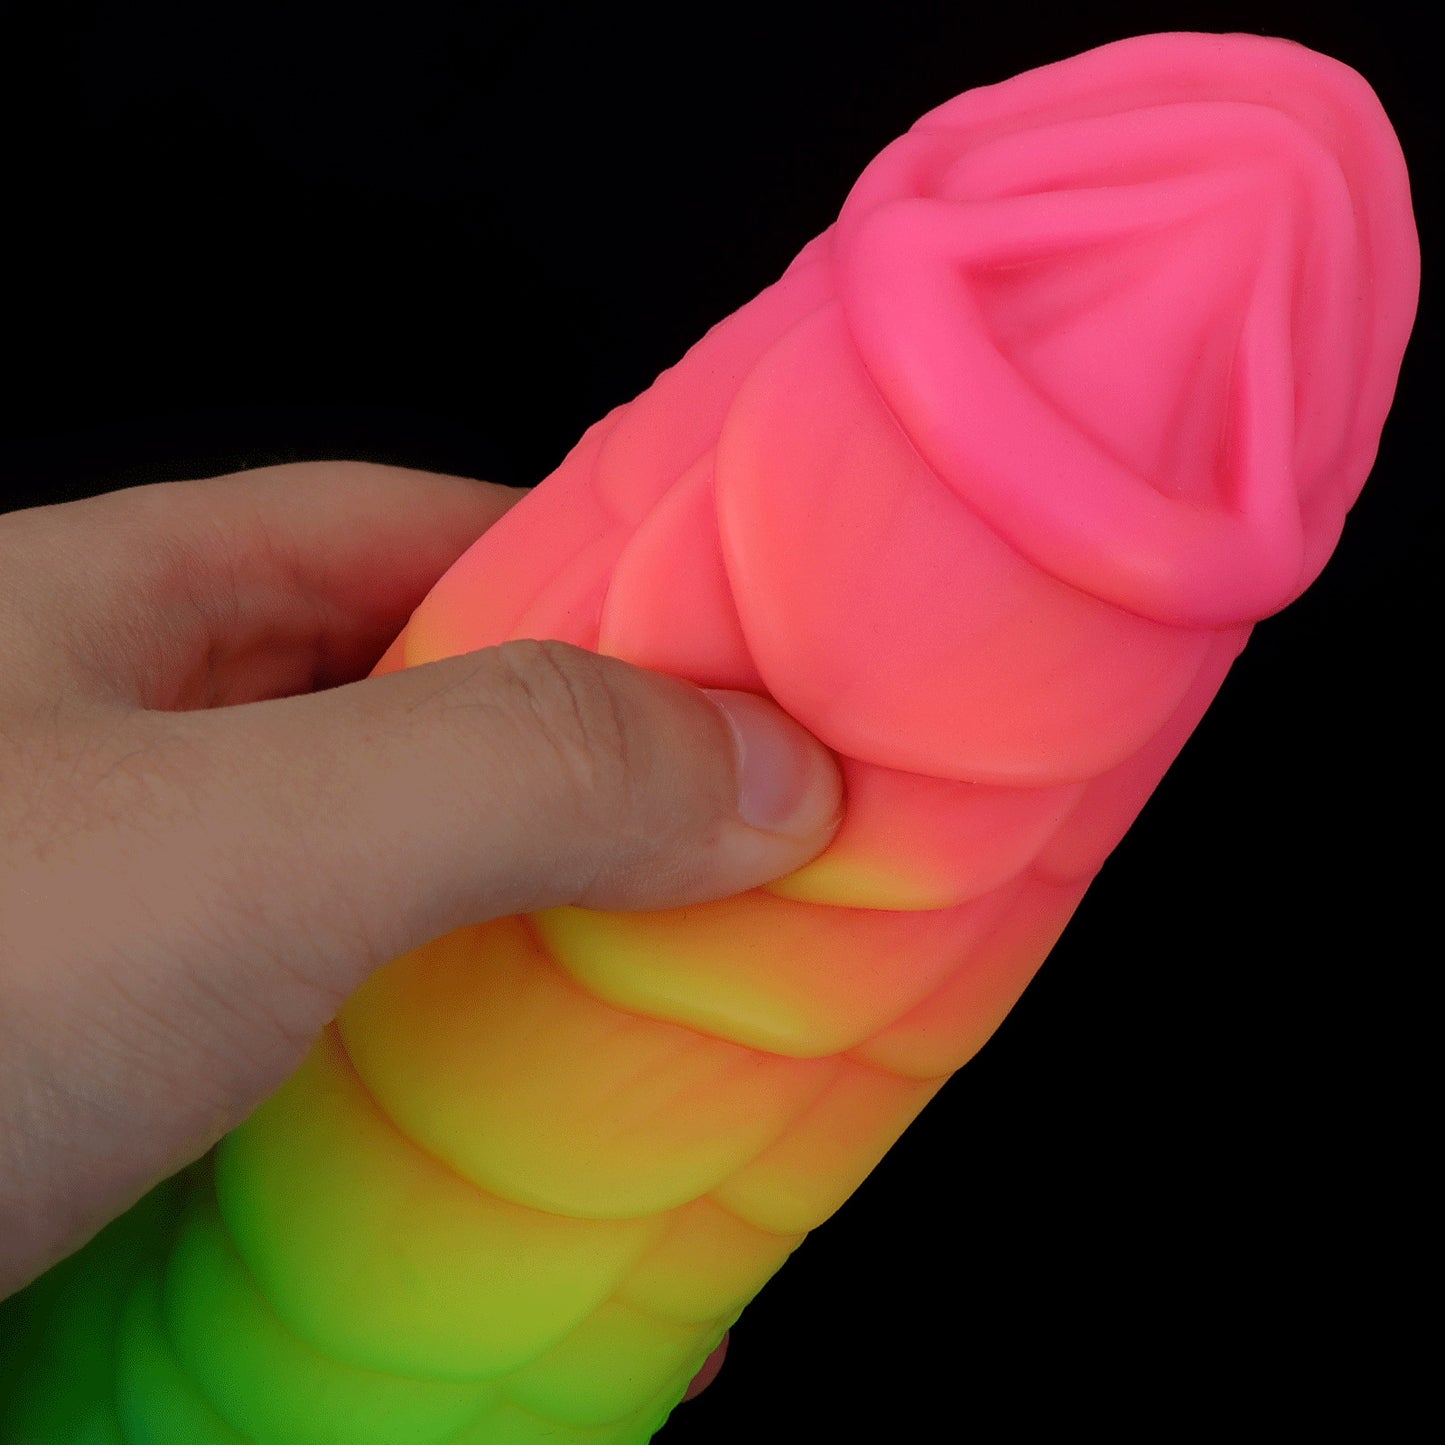 Luminous Dragon Monster Dildo Butt Plug - Colorful Realistic Anal Dildos Silicone Sex Toy